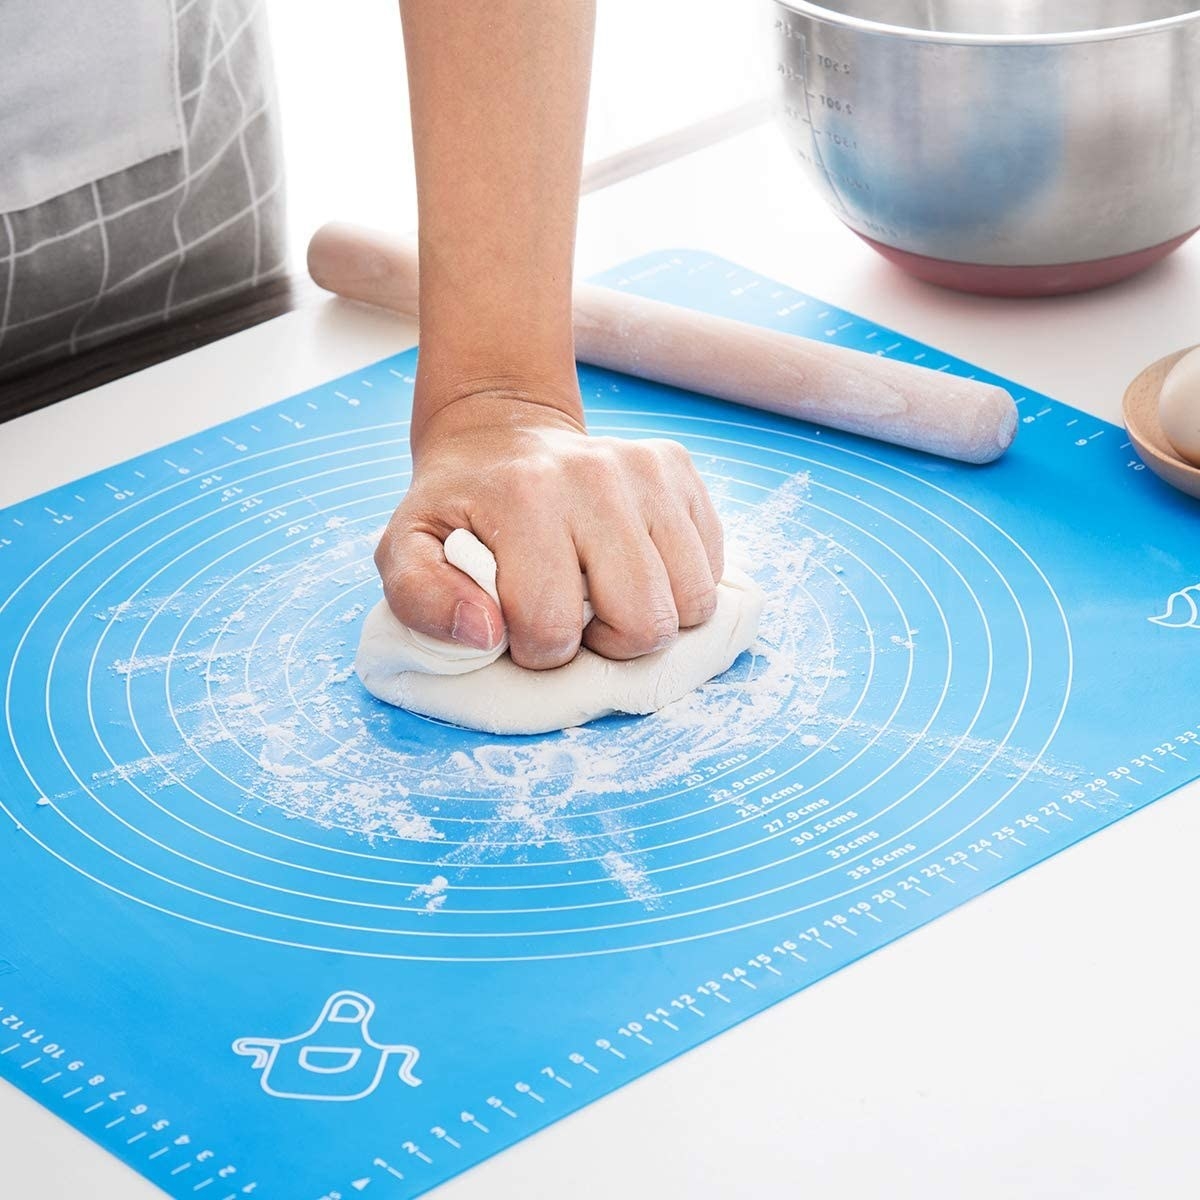 A person smashes a ball of dough onto the centre of the silicone baking mat